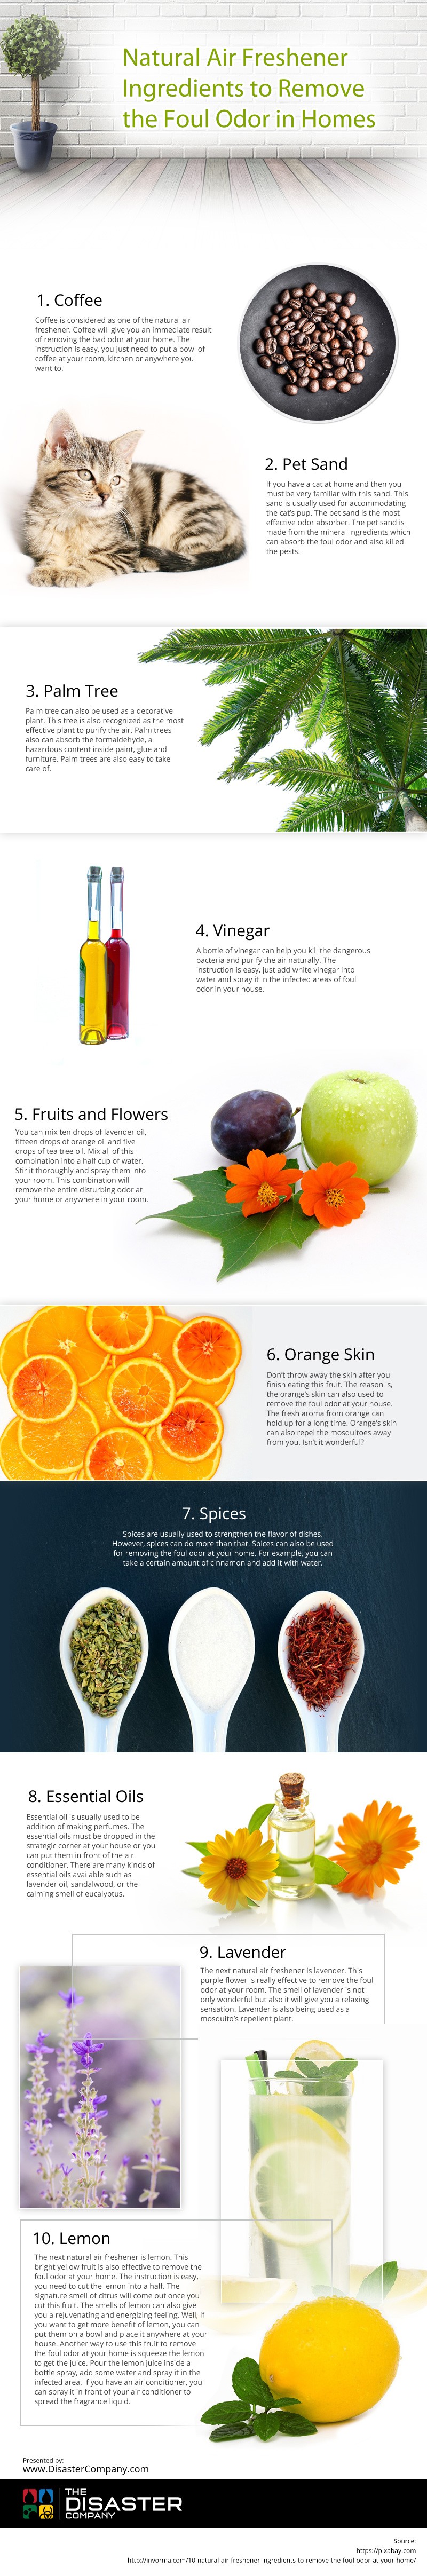 Natural-Air-Freshener-Ingredients-to-Remove-the-Foul-Odor-in-Homes Infographic